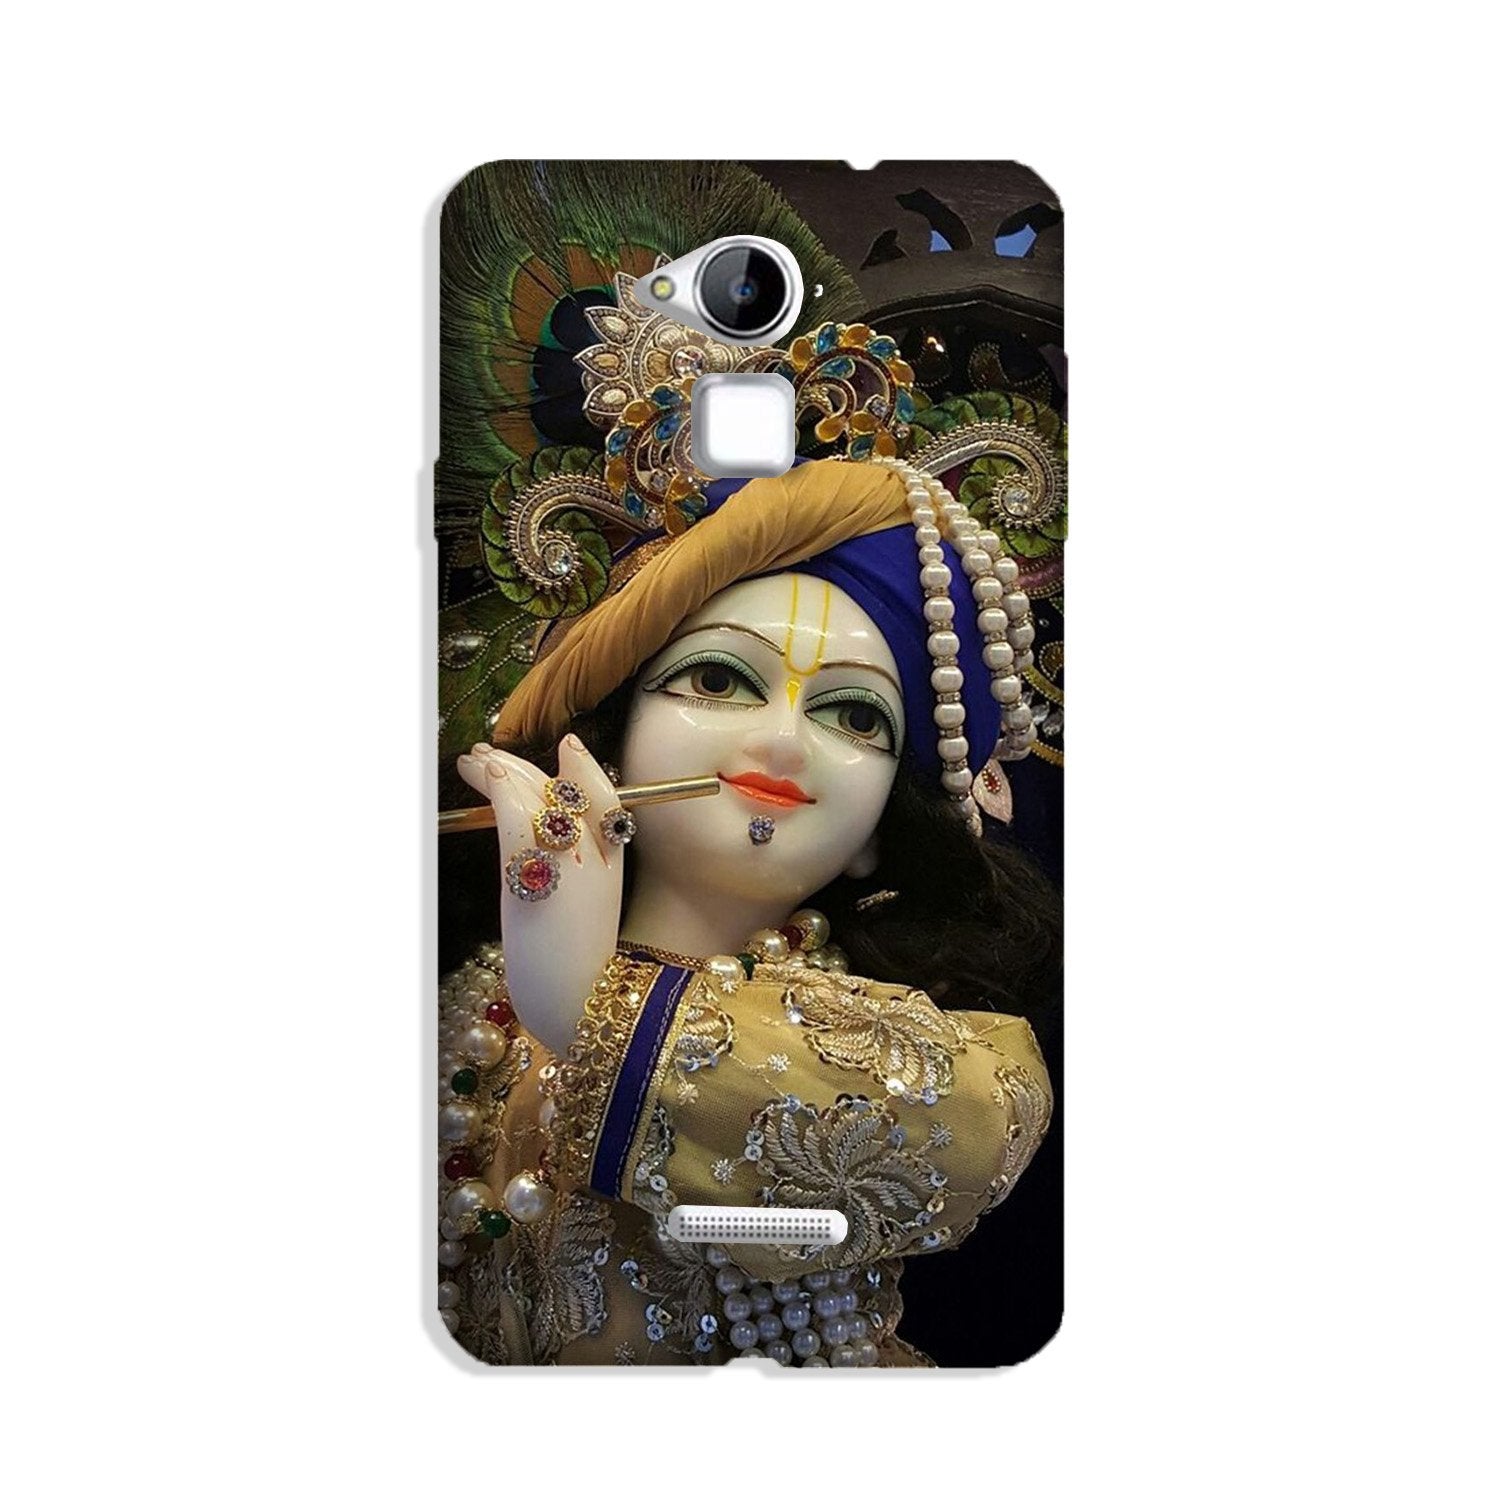 Lord Krishna3 Case for Coolpad Note 3